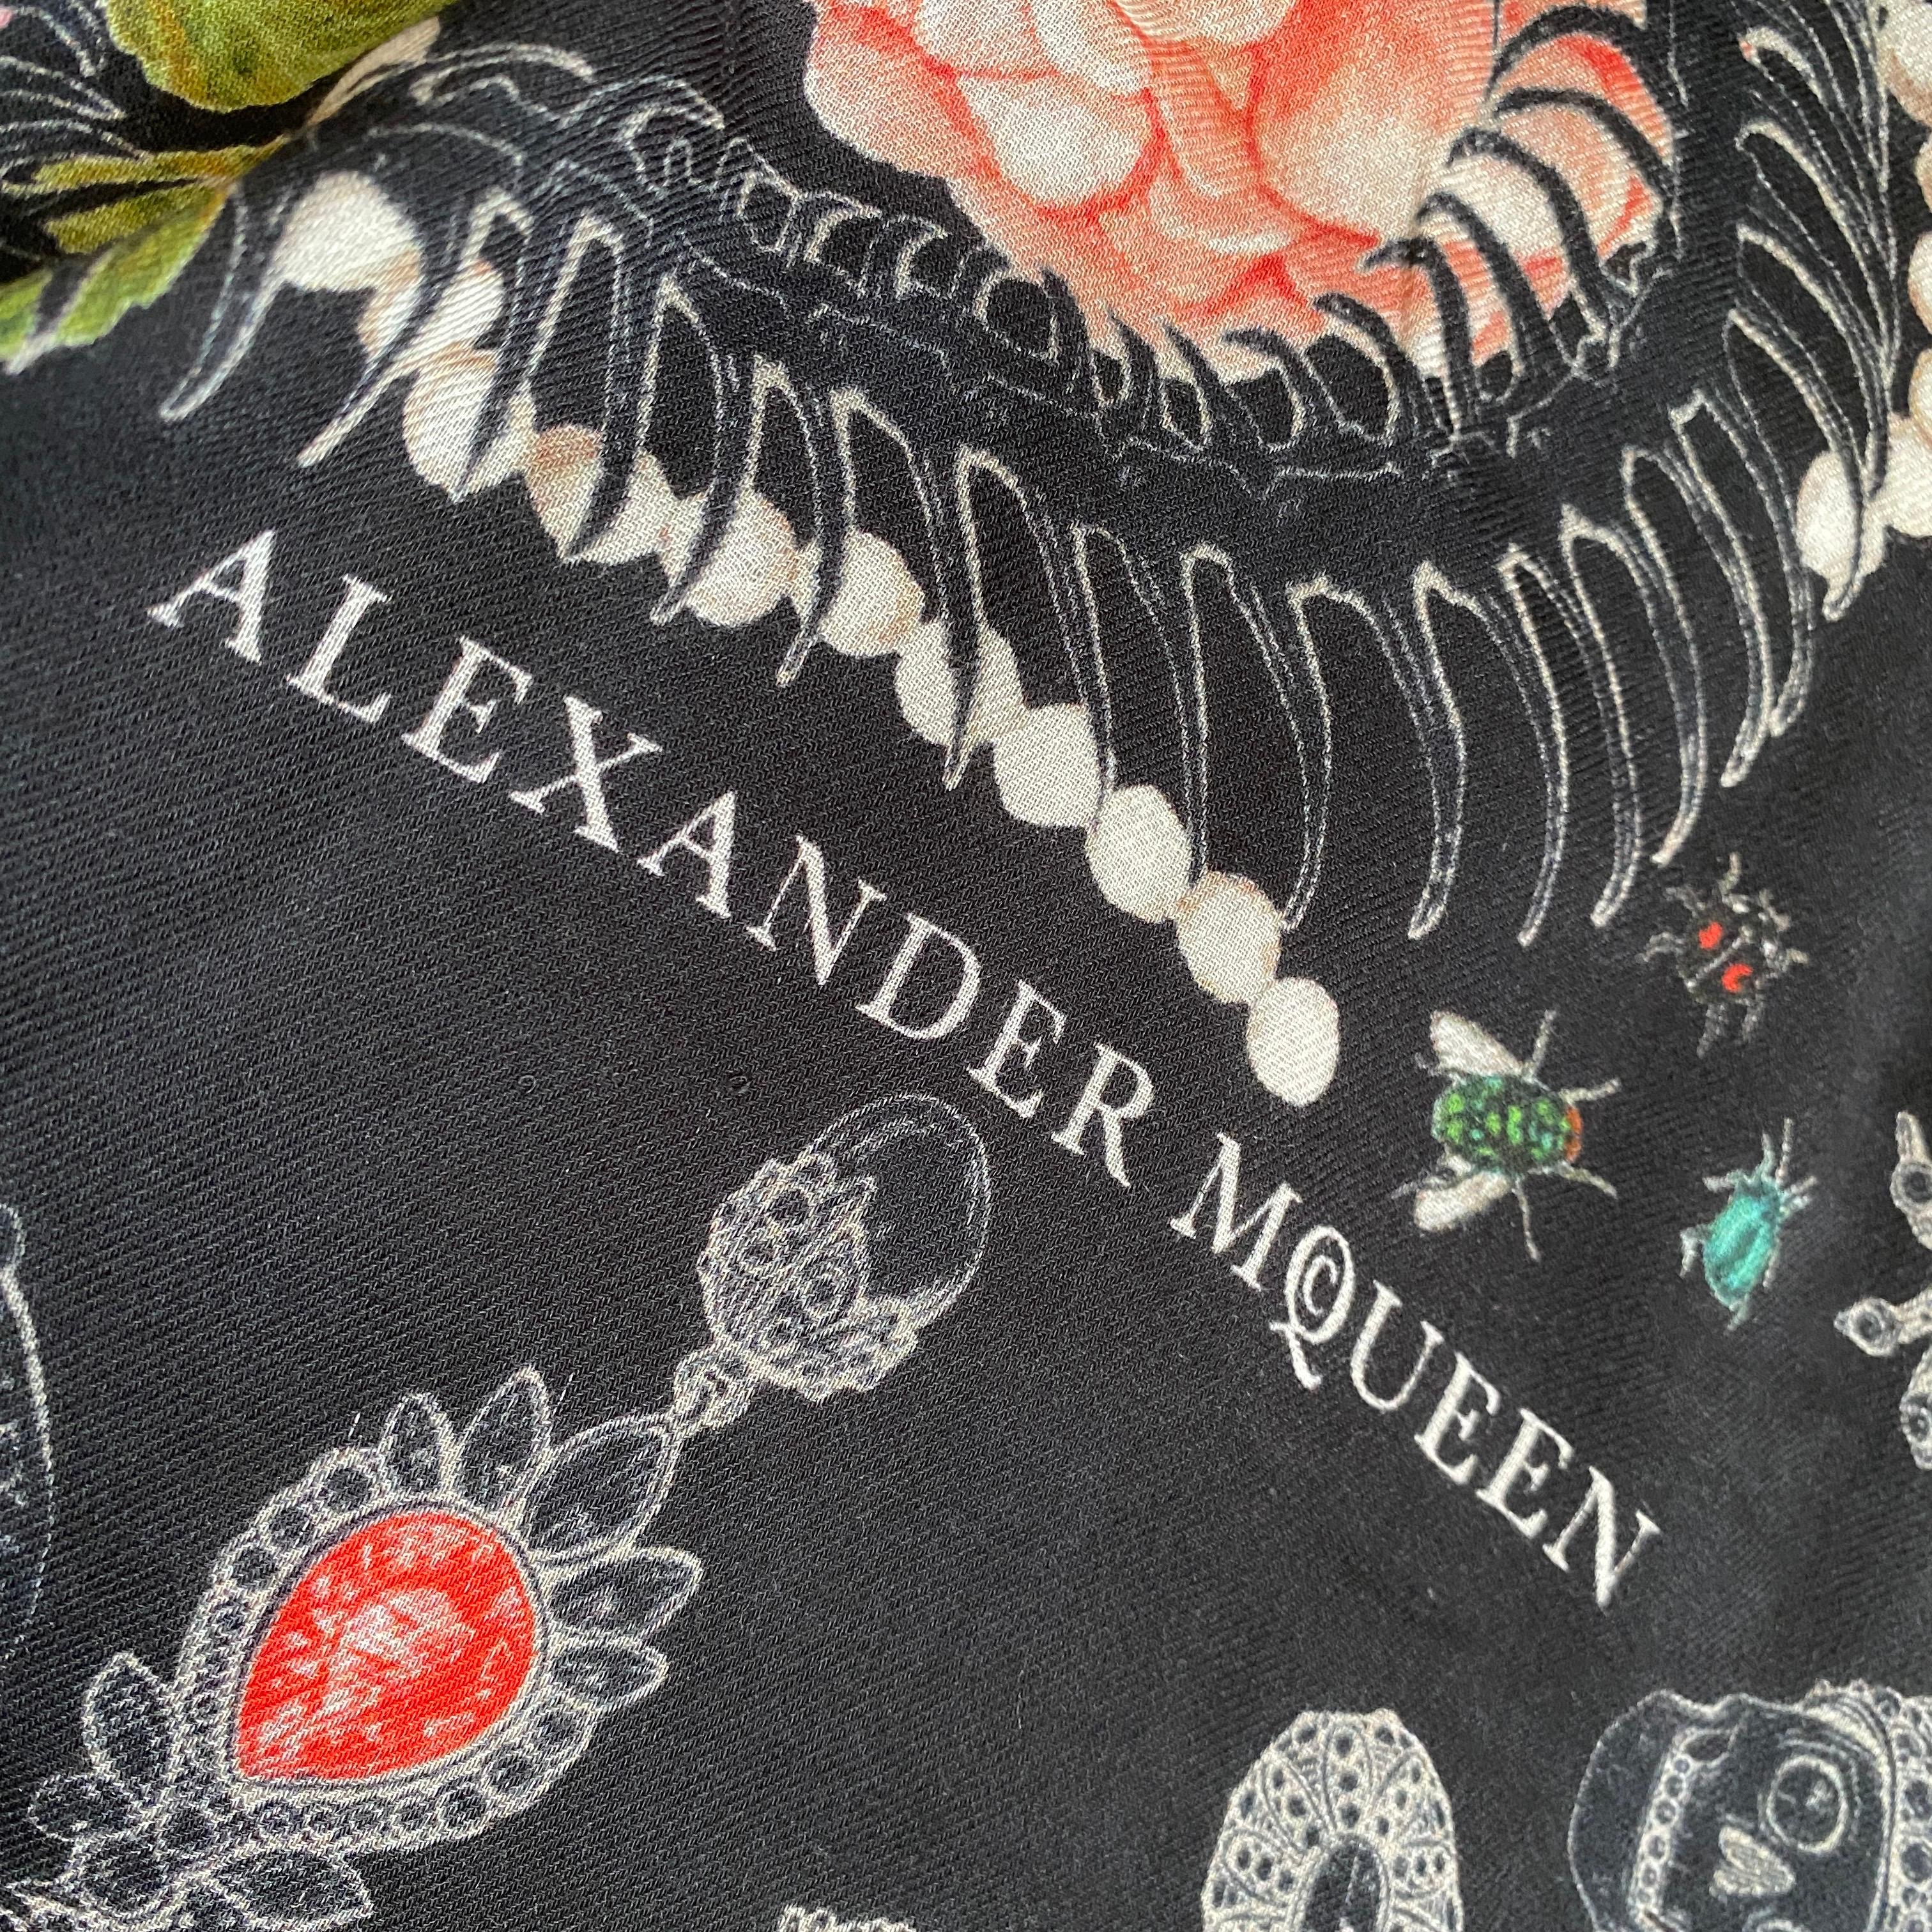 Vintage Alexander McQueen Scarf, made in Italy 11